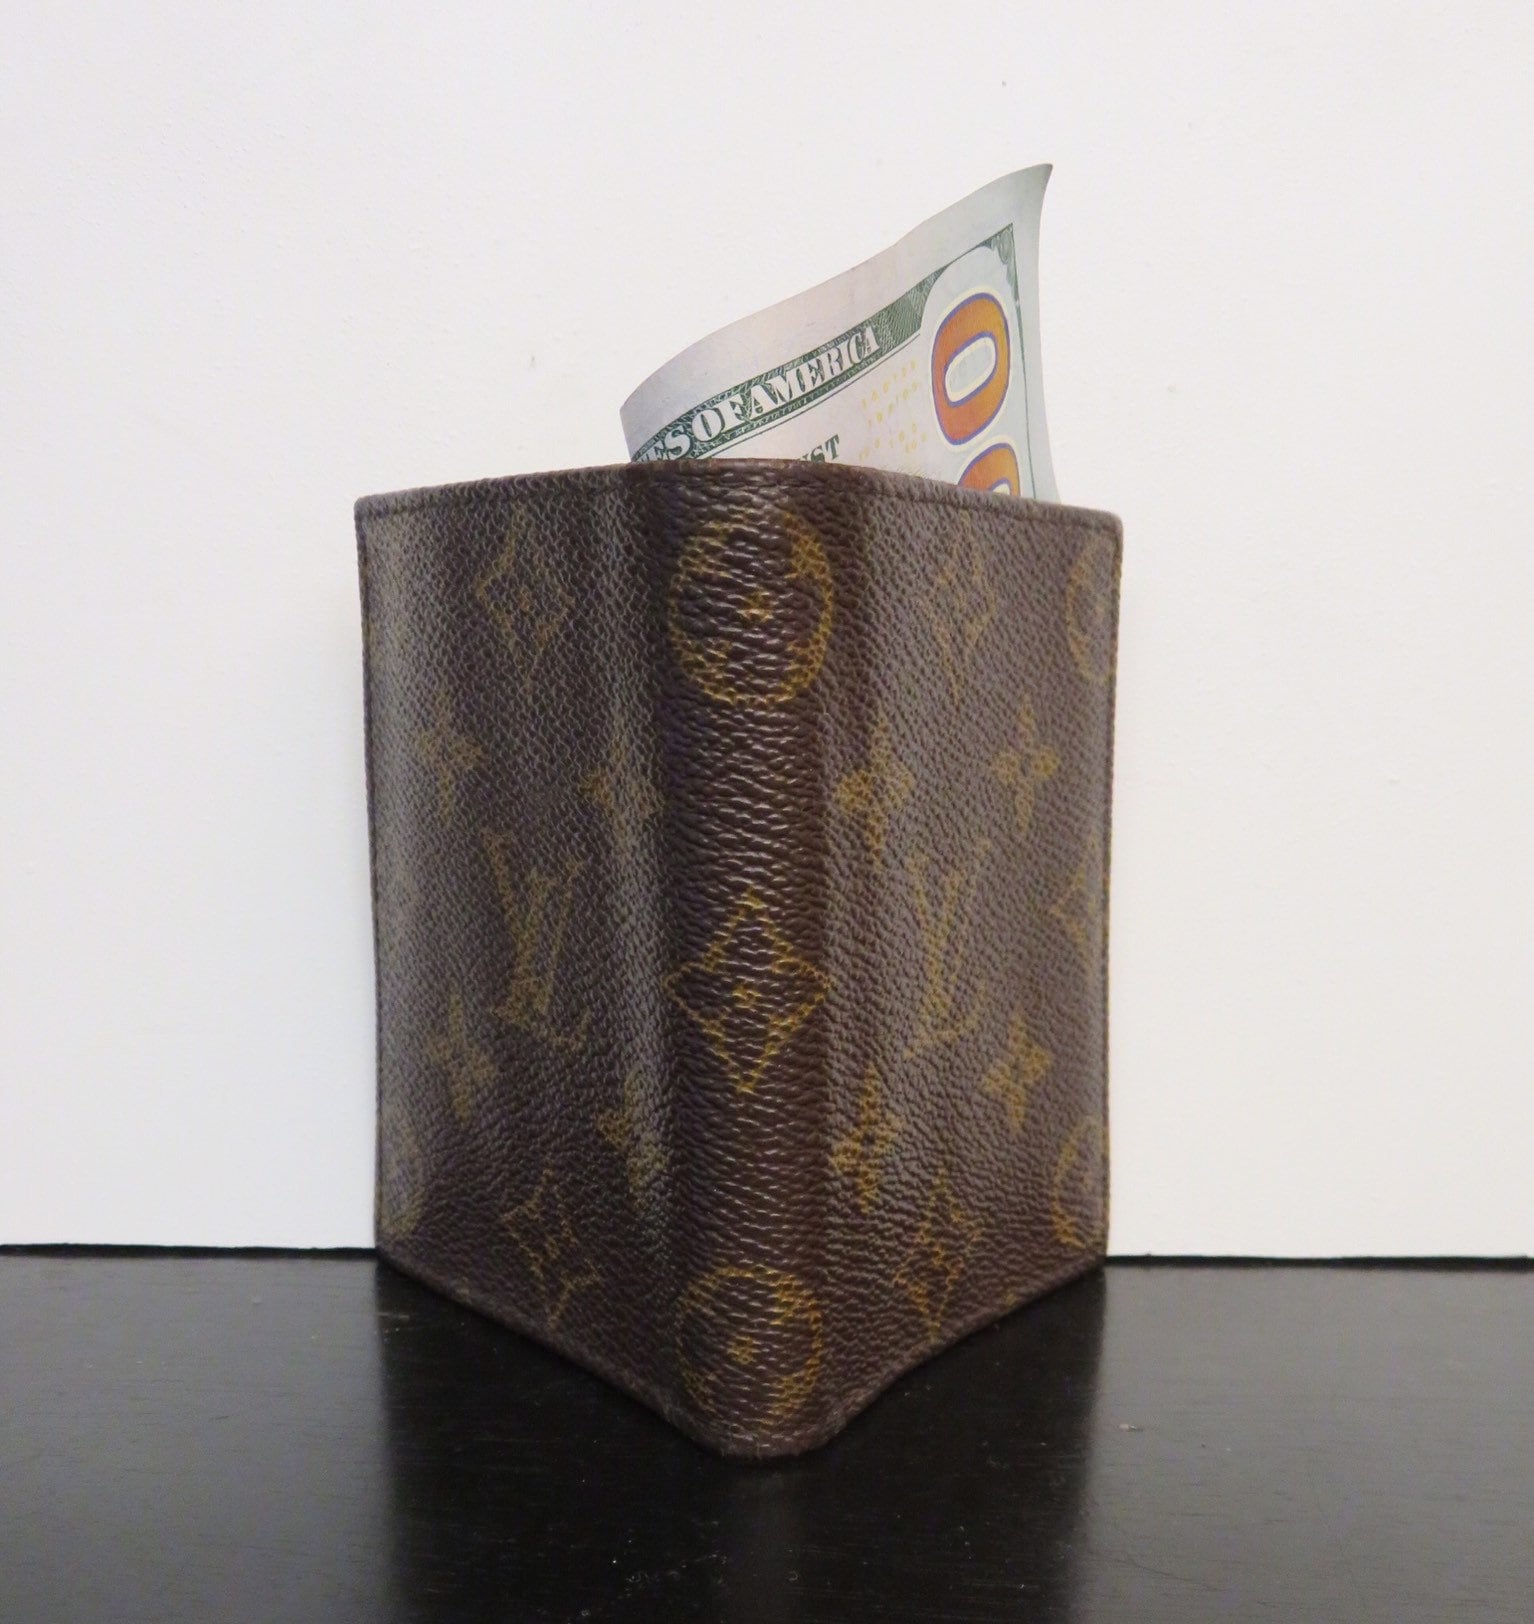 Louis Vuitton Félicie Chain Wallet in Monogram with Custom Made